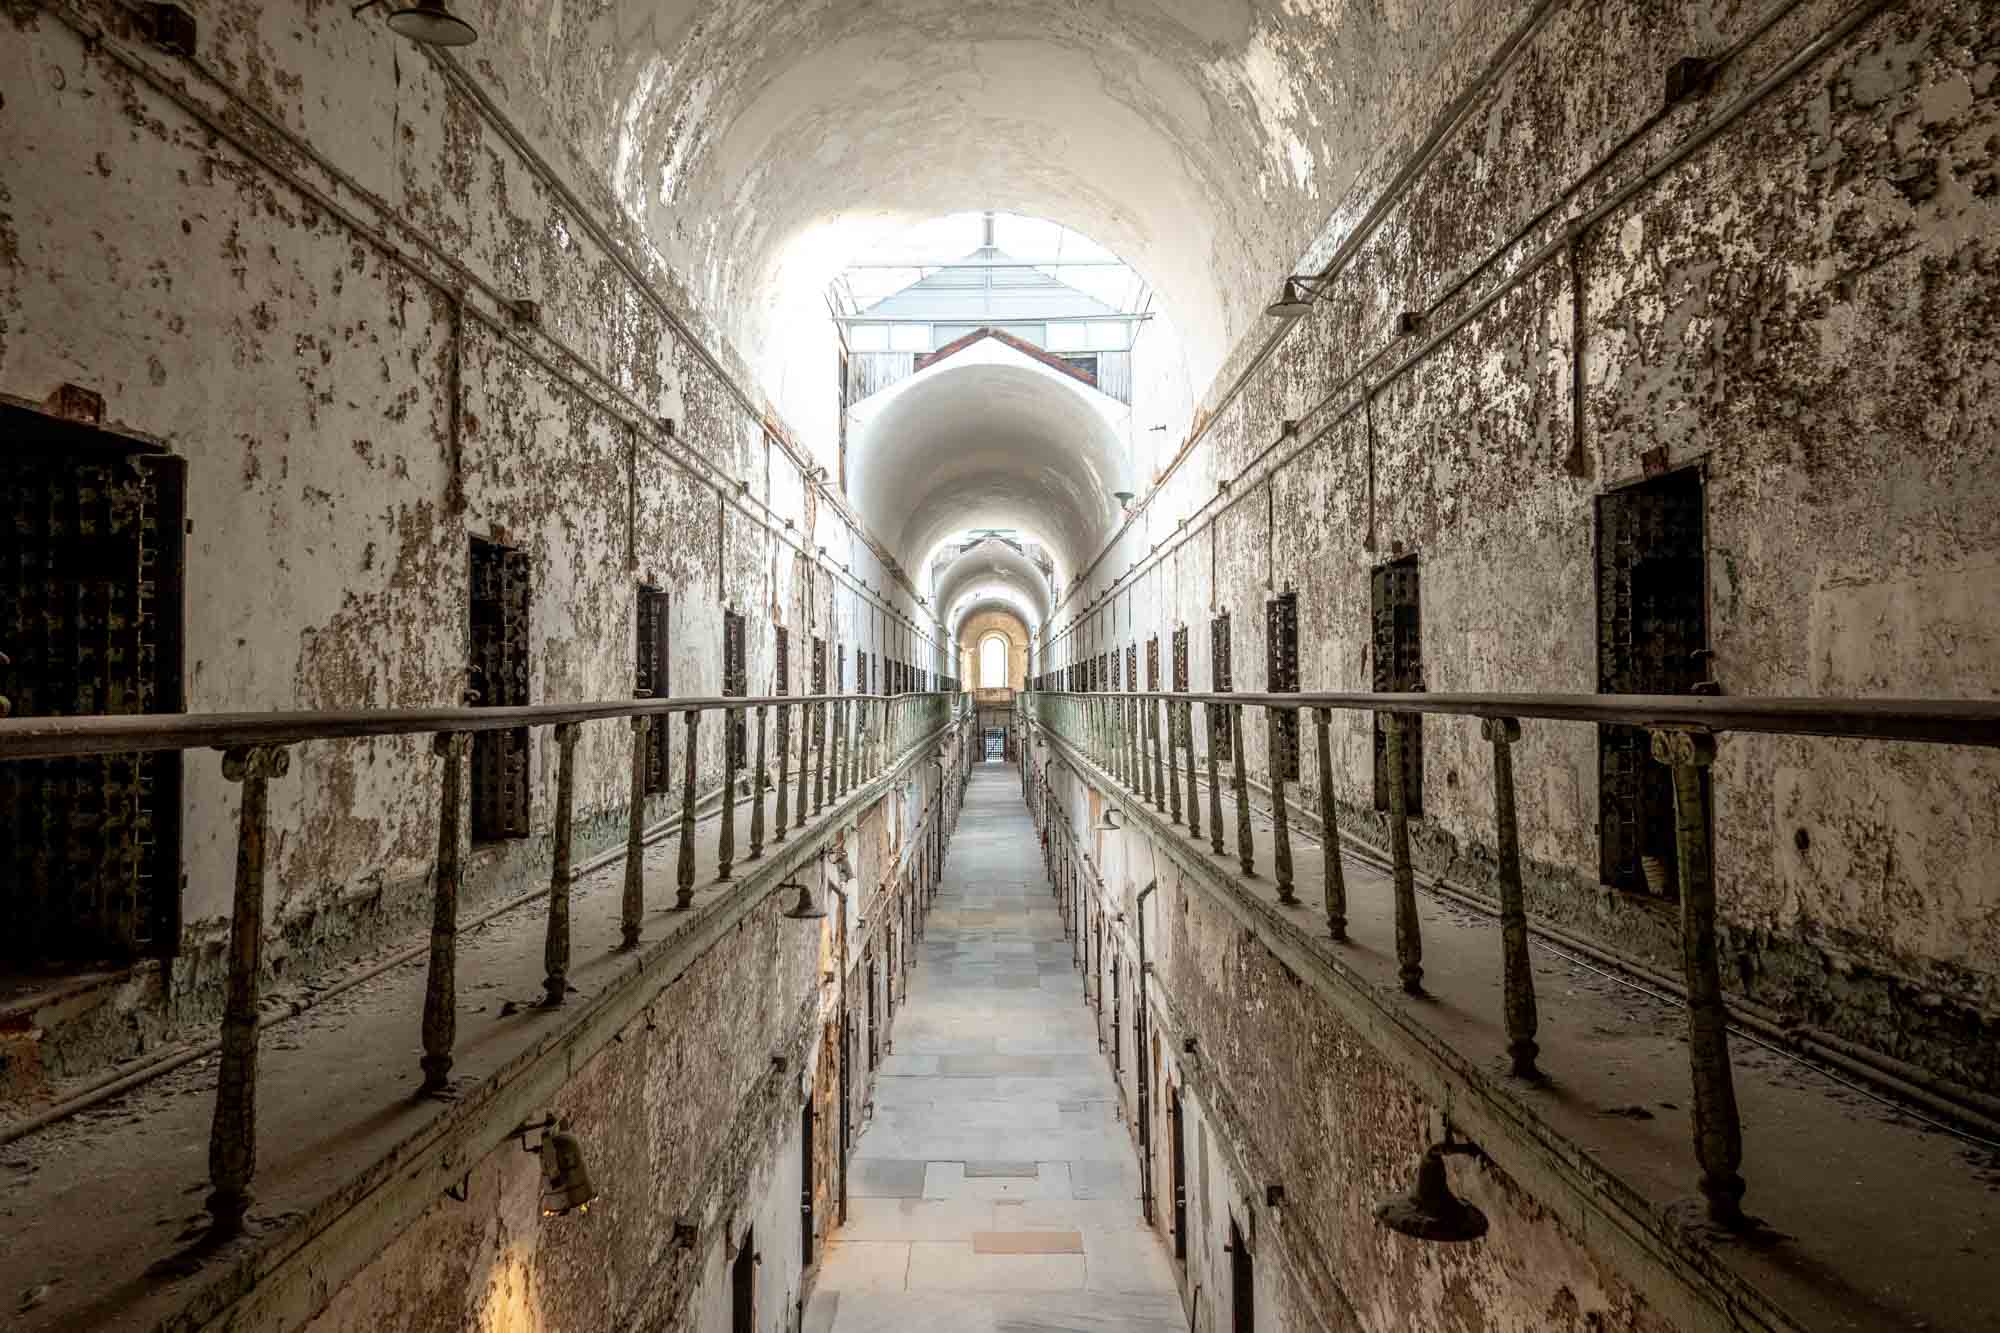 Cell block of Eastern State Penitentiary, an abandoned jail.